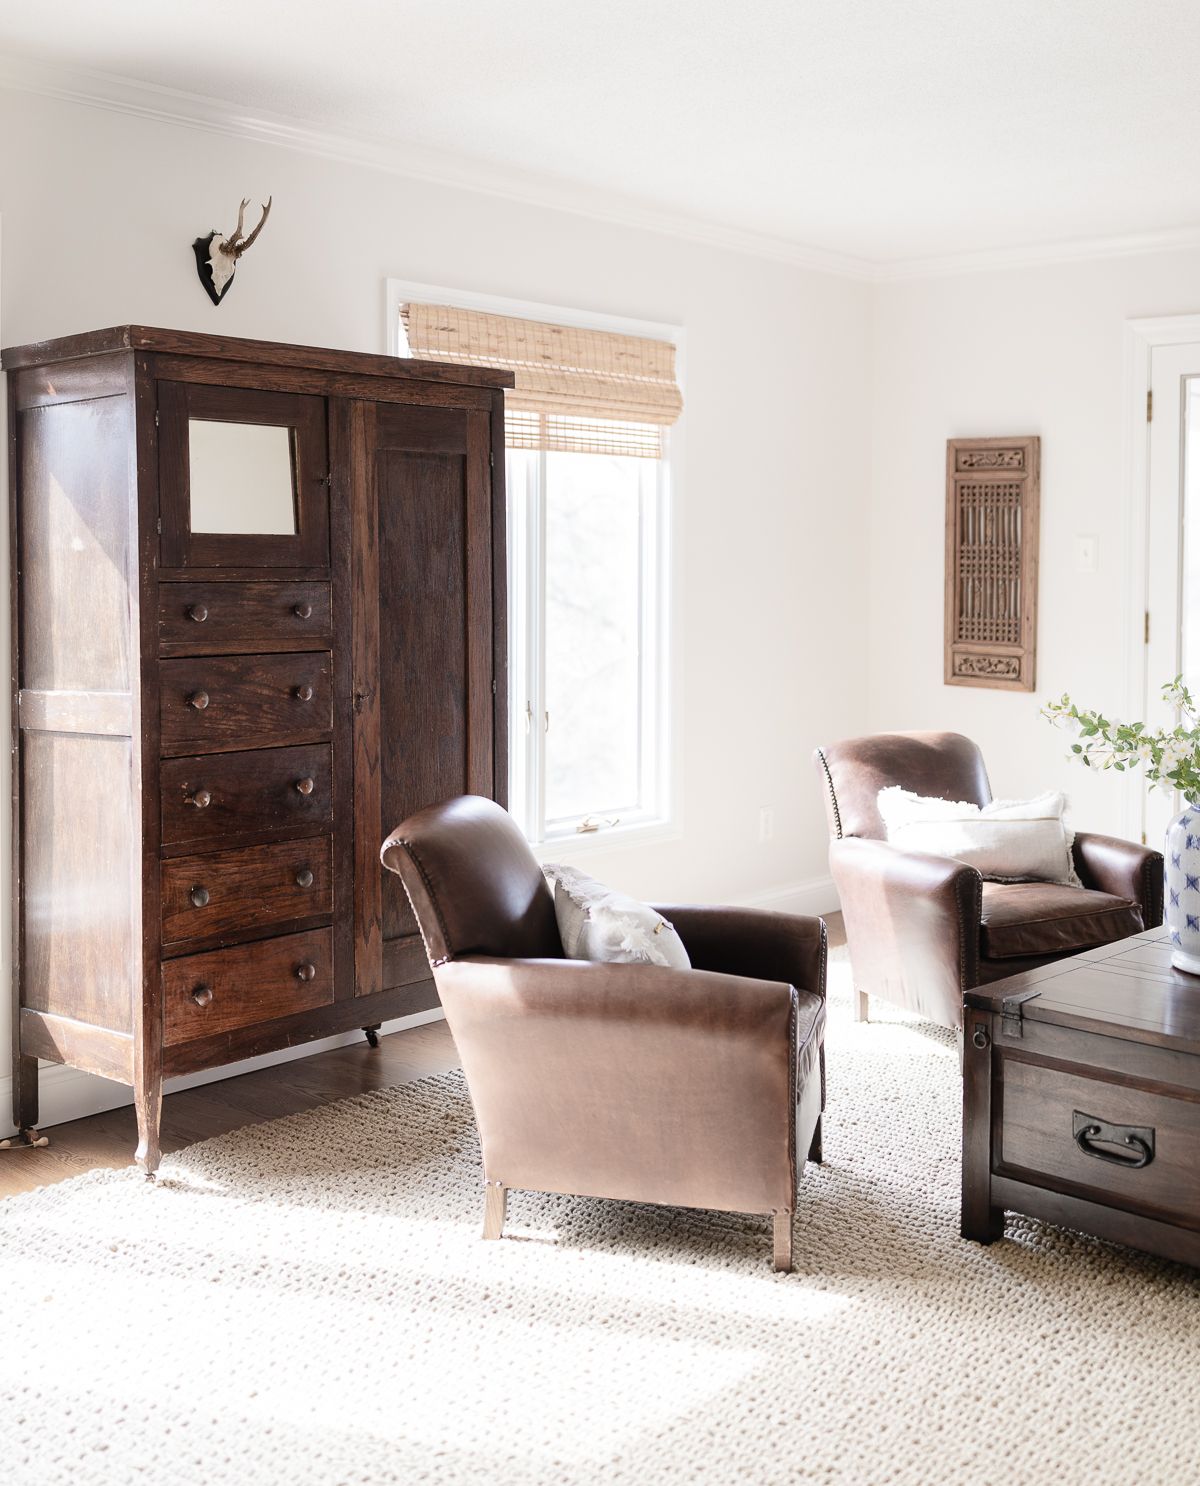 A living room in a cozy home featuring leather chairs and an antique wood armoire TeamJiX